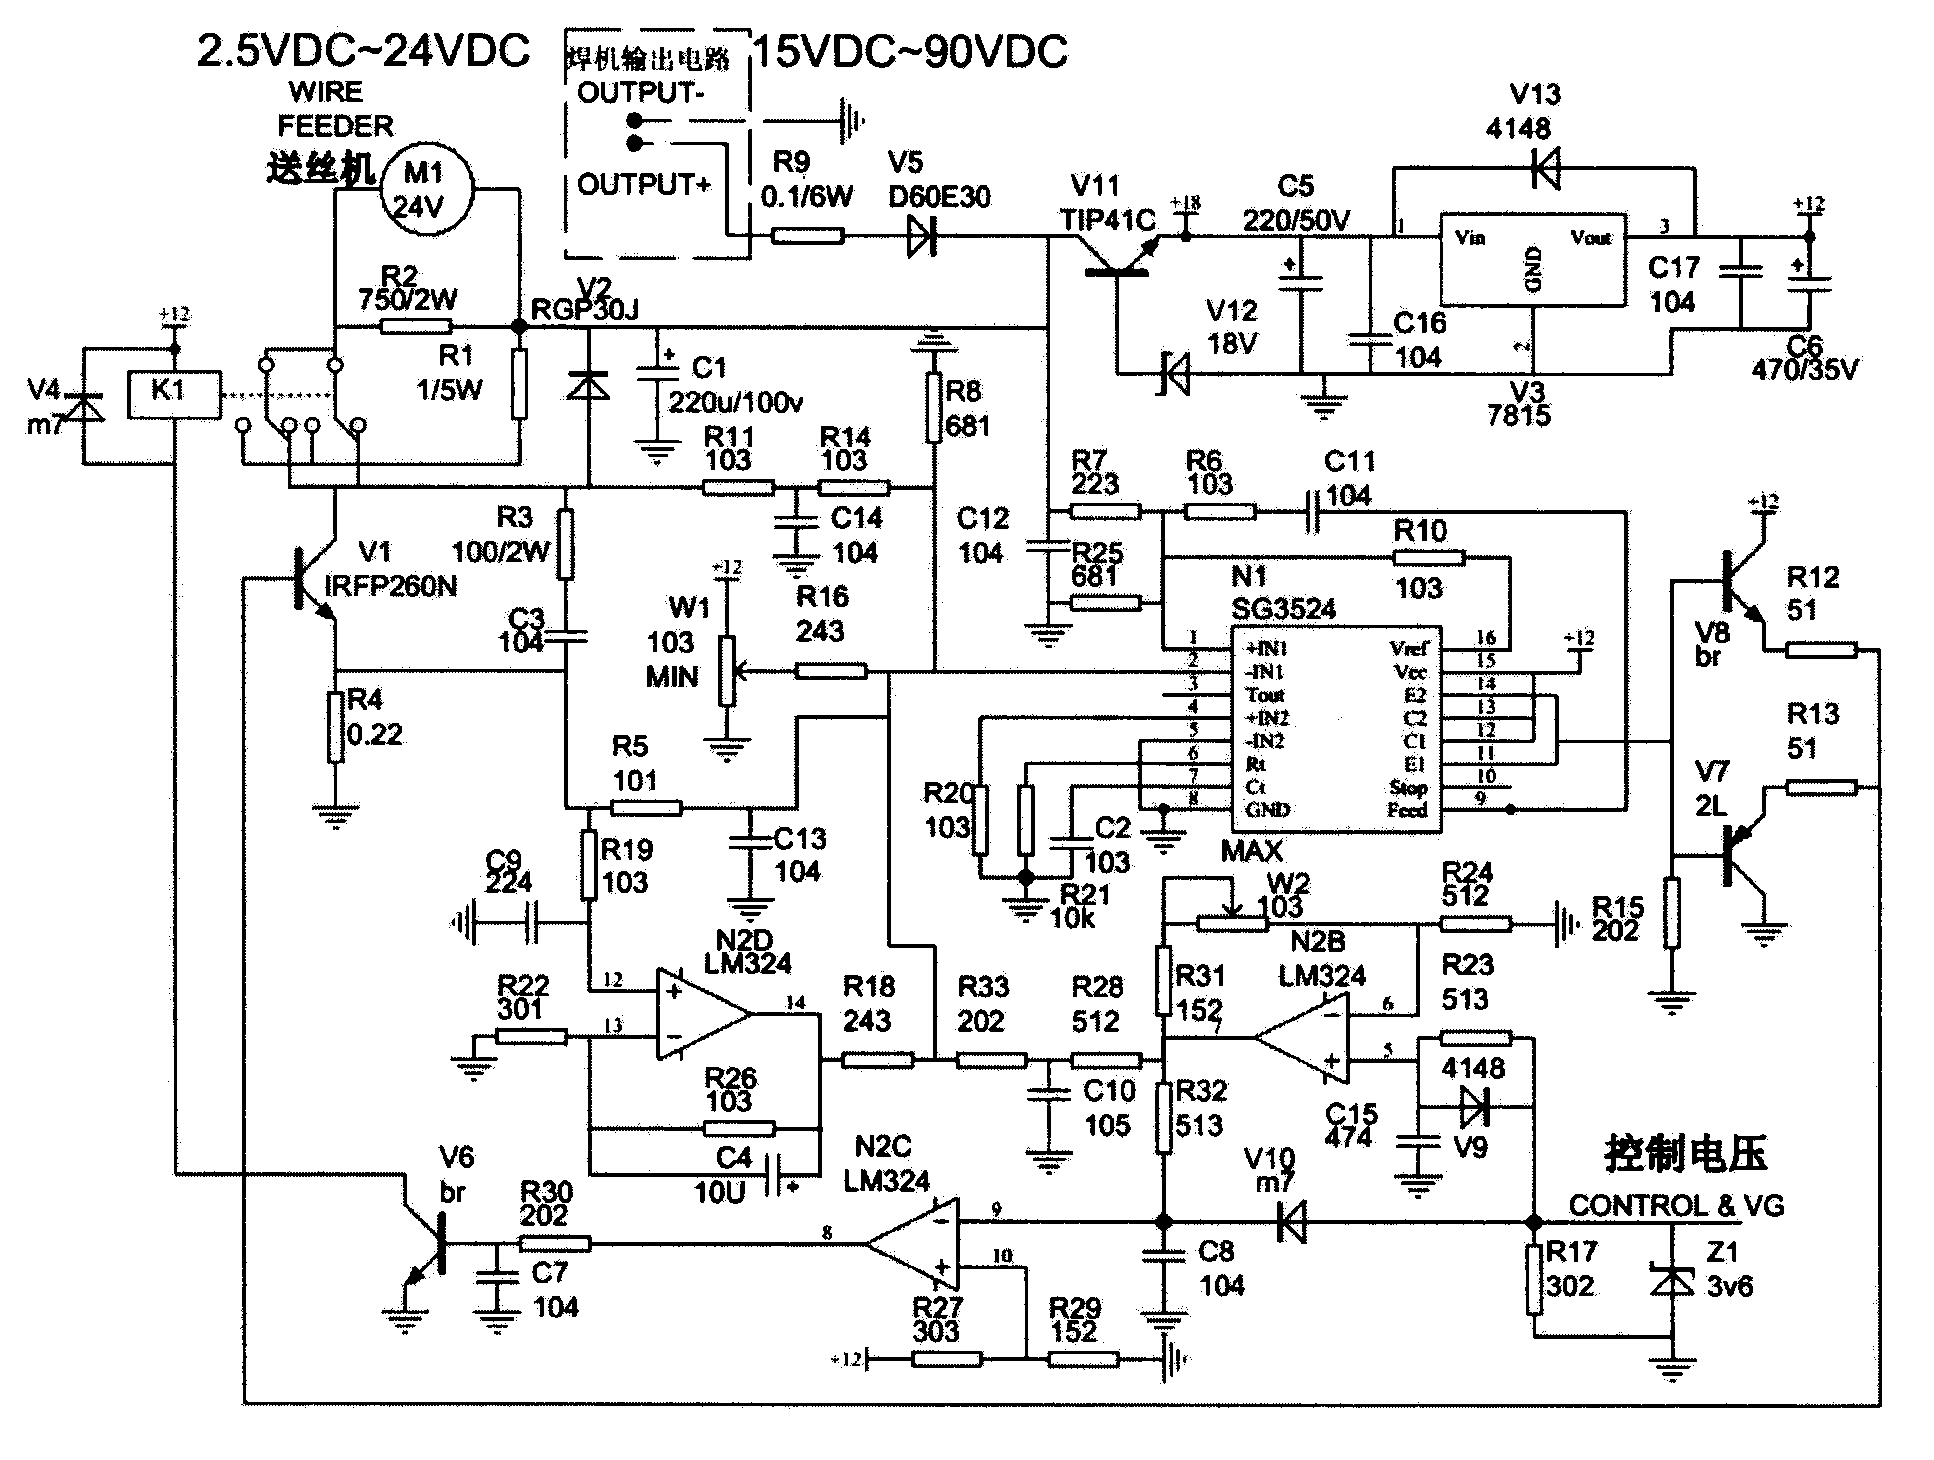 Wire feeder control circuit